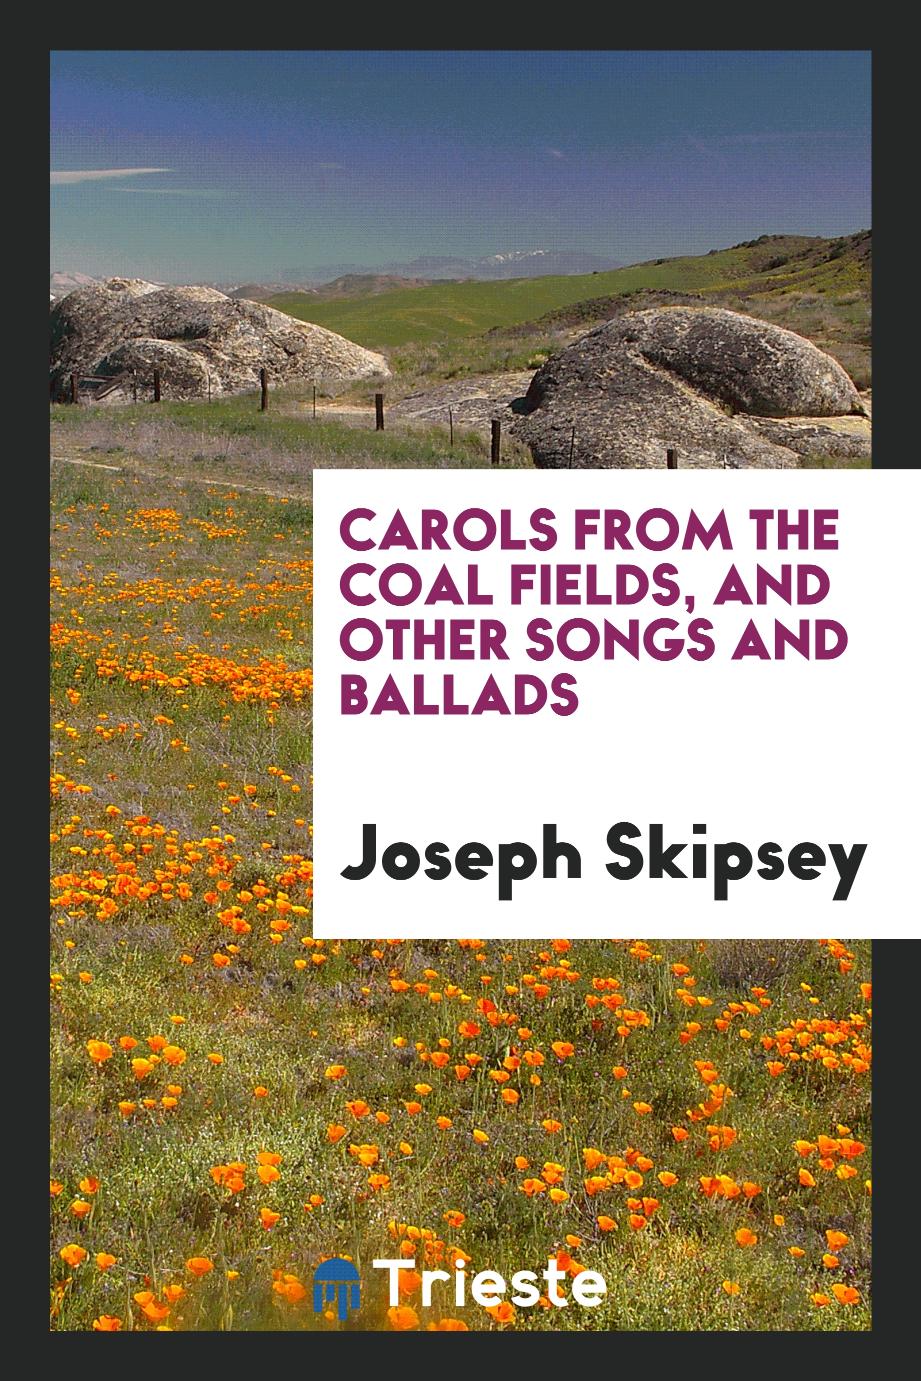 Carols from the coal fields, and other songs and ballads